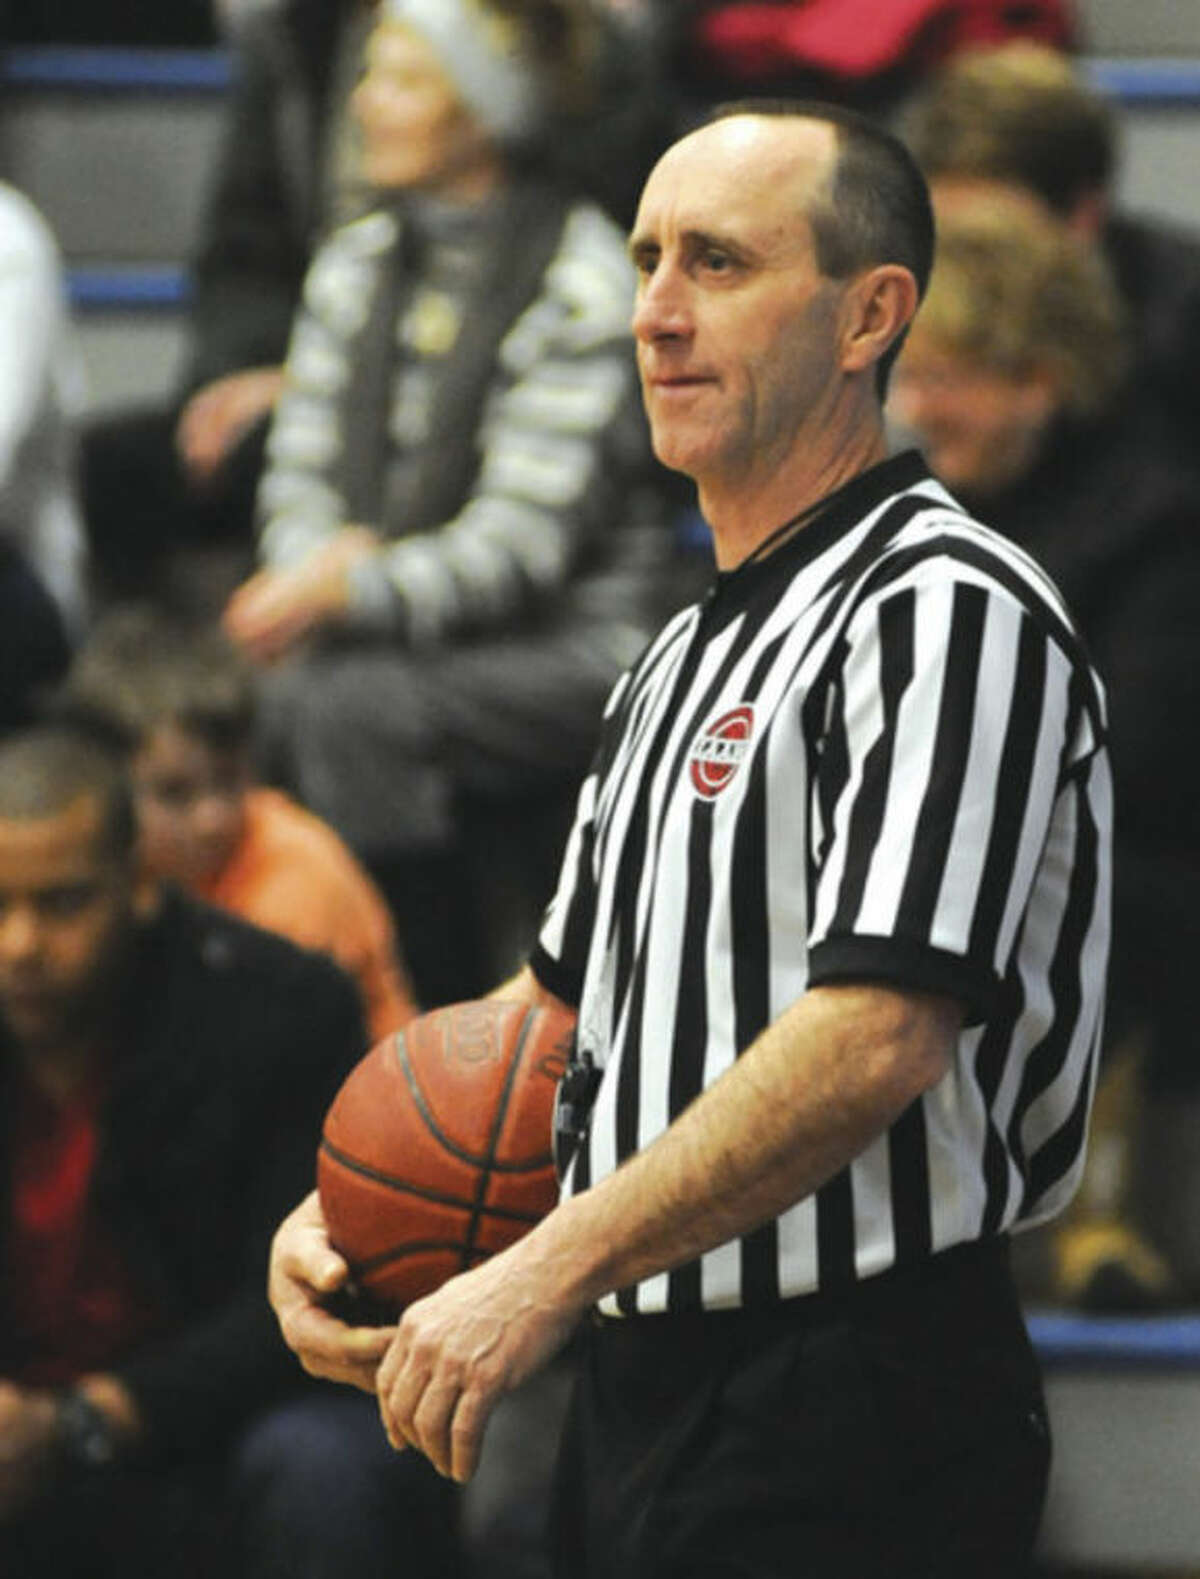 Hour photo/John Nash It takes a little effort to earn your stripes as a basketball official in this area. The Fairfield County Board of Approved Basketball Officials, or IAABO Board 9, provides a lot of education for those interested in becoming referees and those -- such as William Orr, above -- who are already entitled to wear the striped shirts.